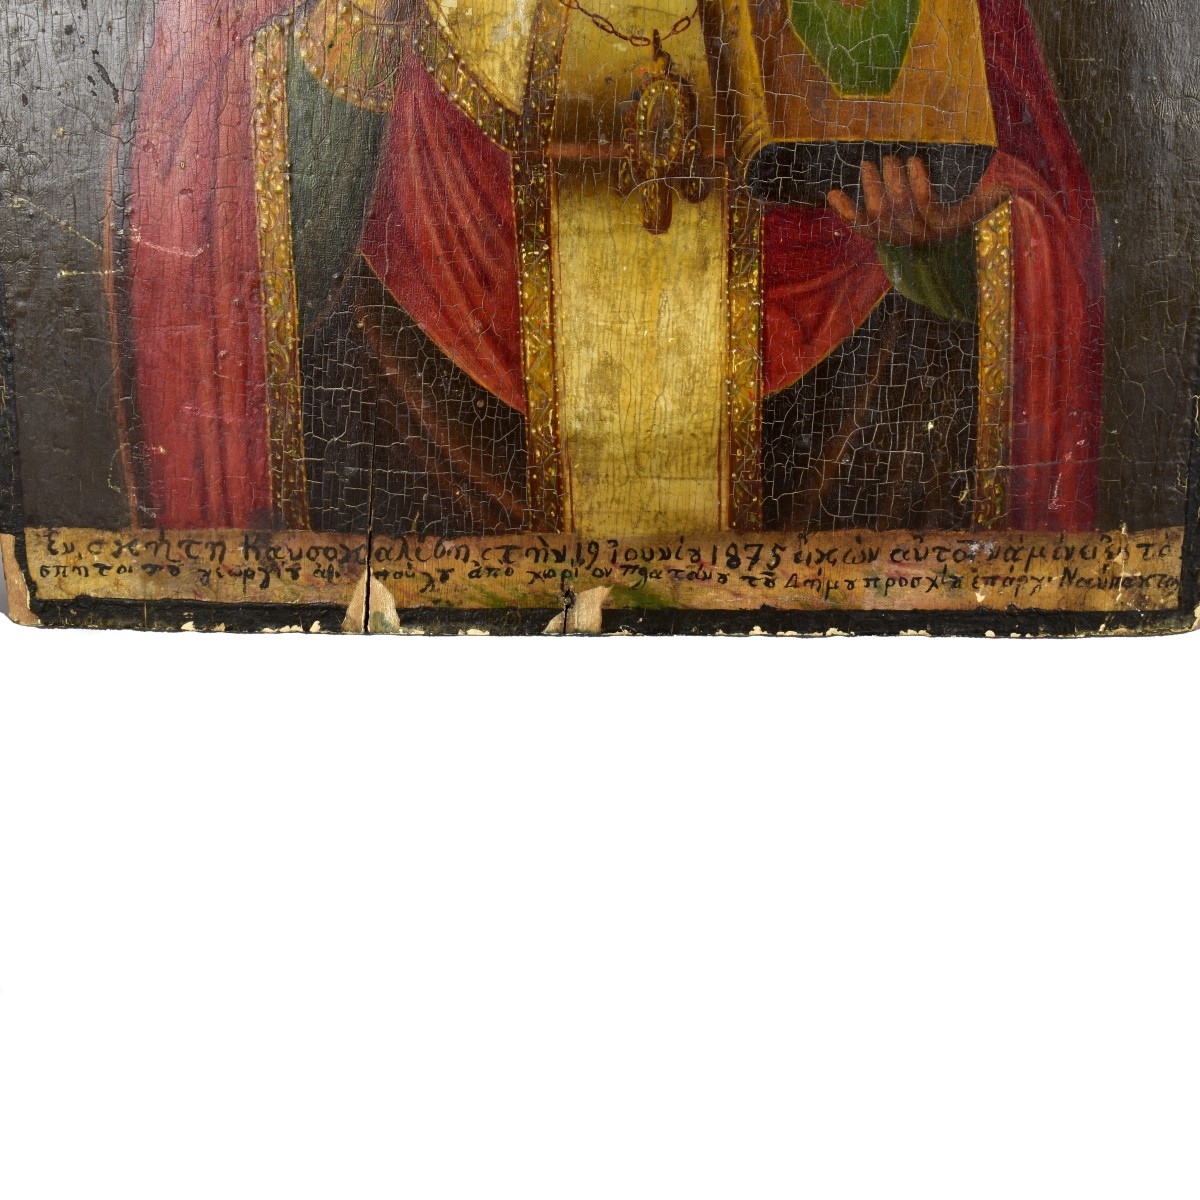 Antique Hand Painted Russian Icon